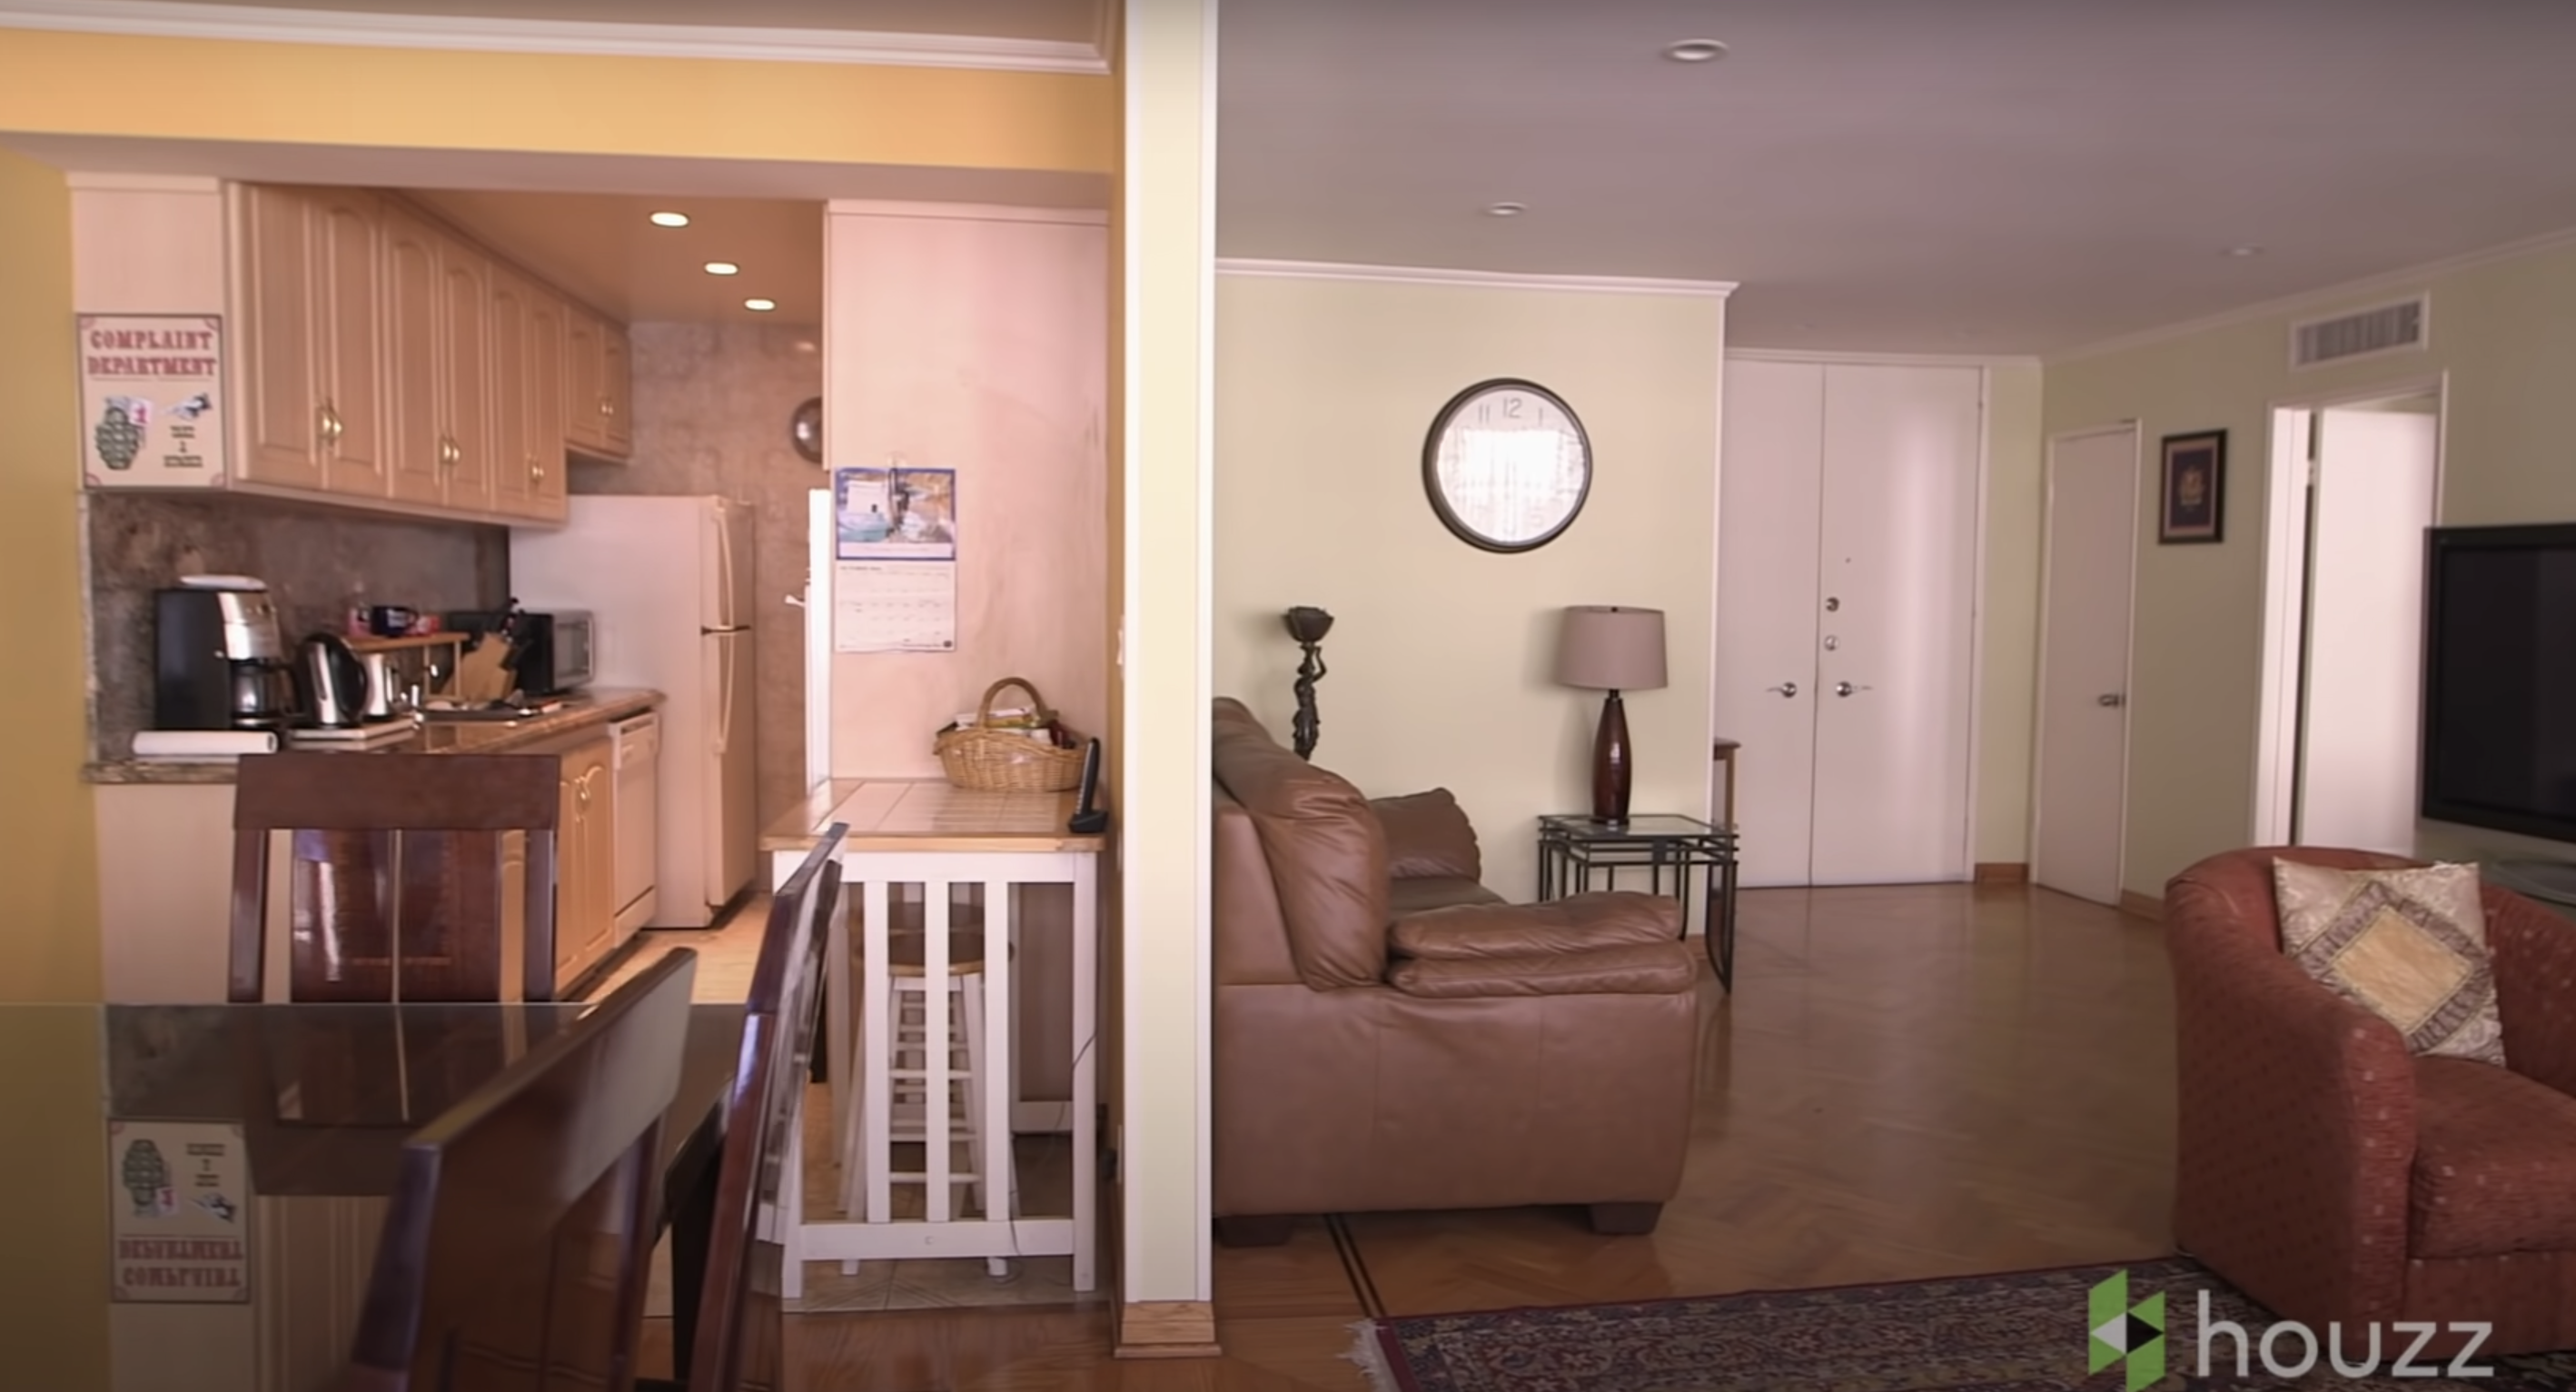 The kitchen area and living room are separated by a wall before the renovation. | Source: Youtube.com/HouzzTV